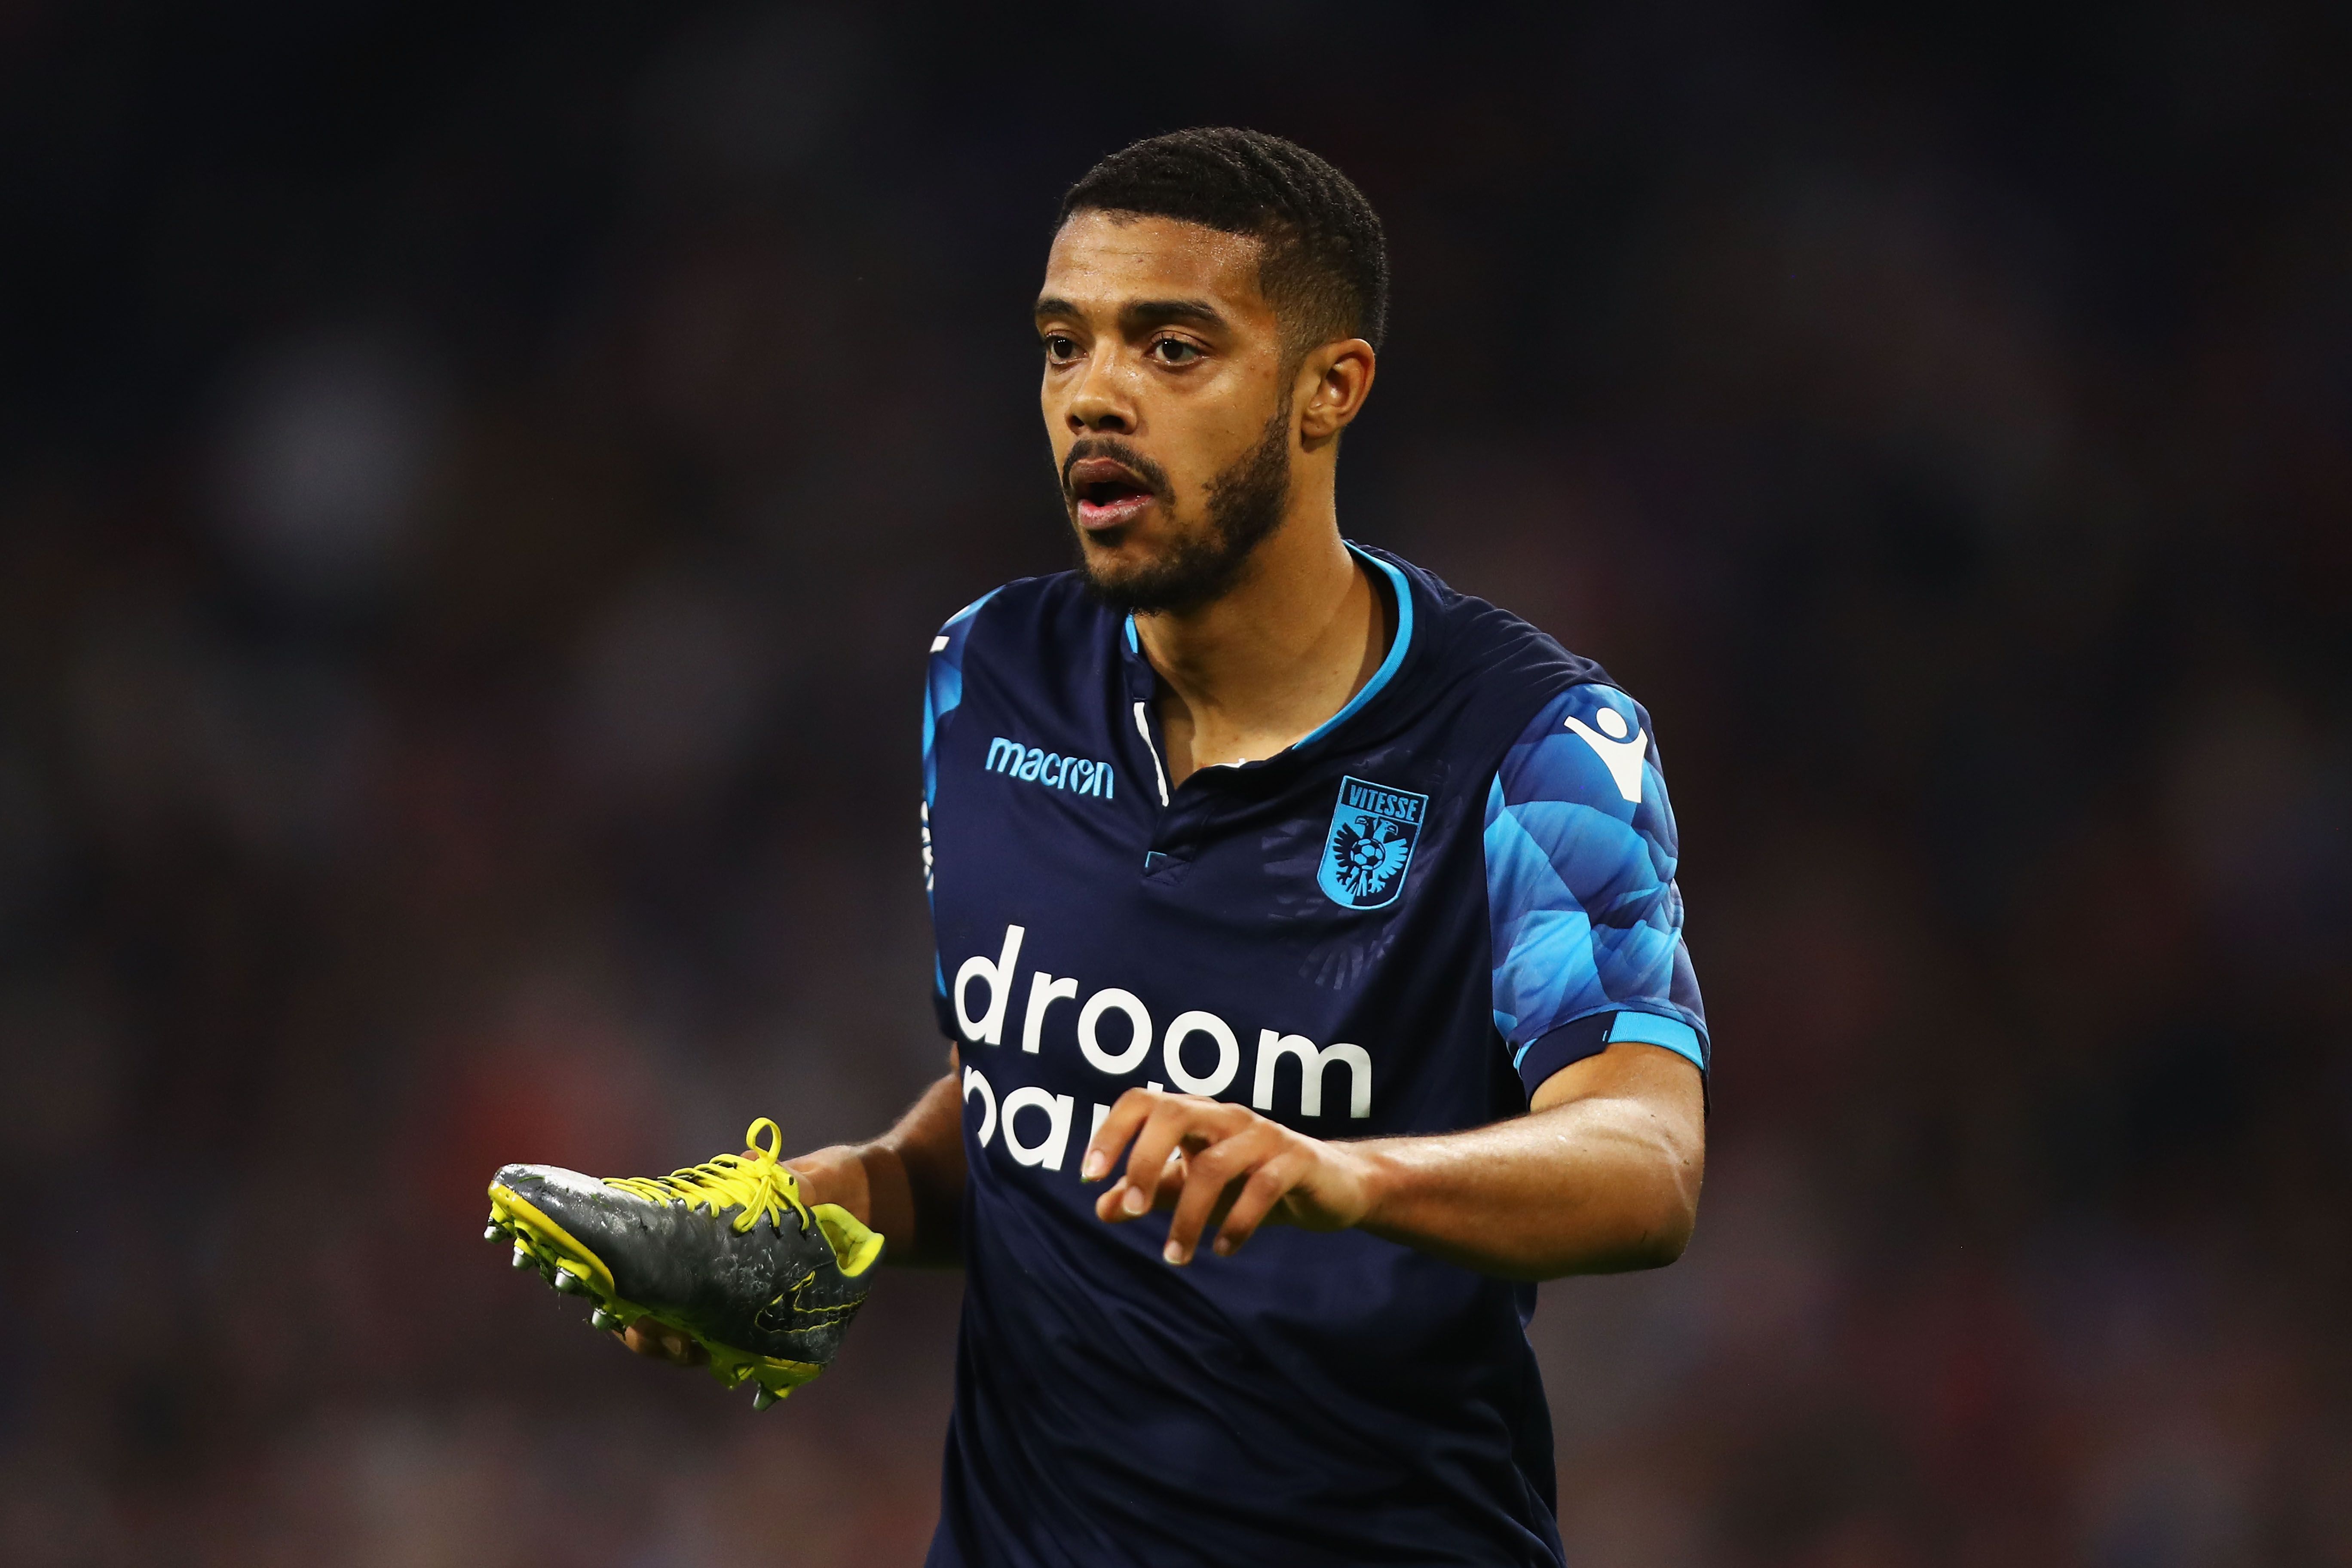 Jake Clarke-Salter needs to move away from Chelsea